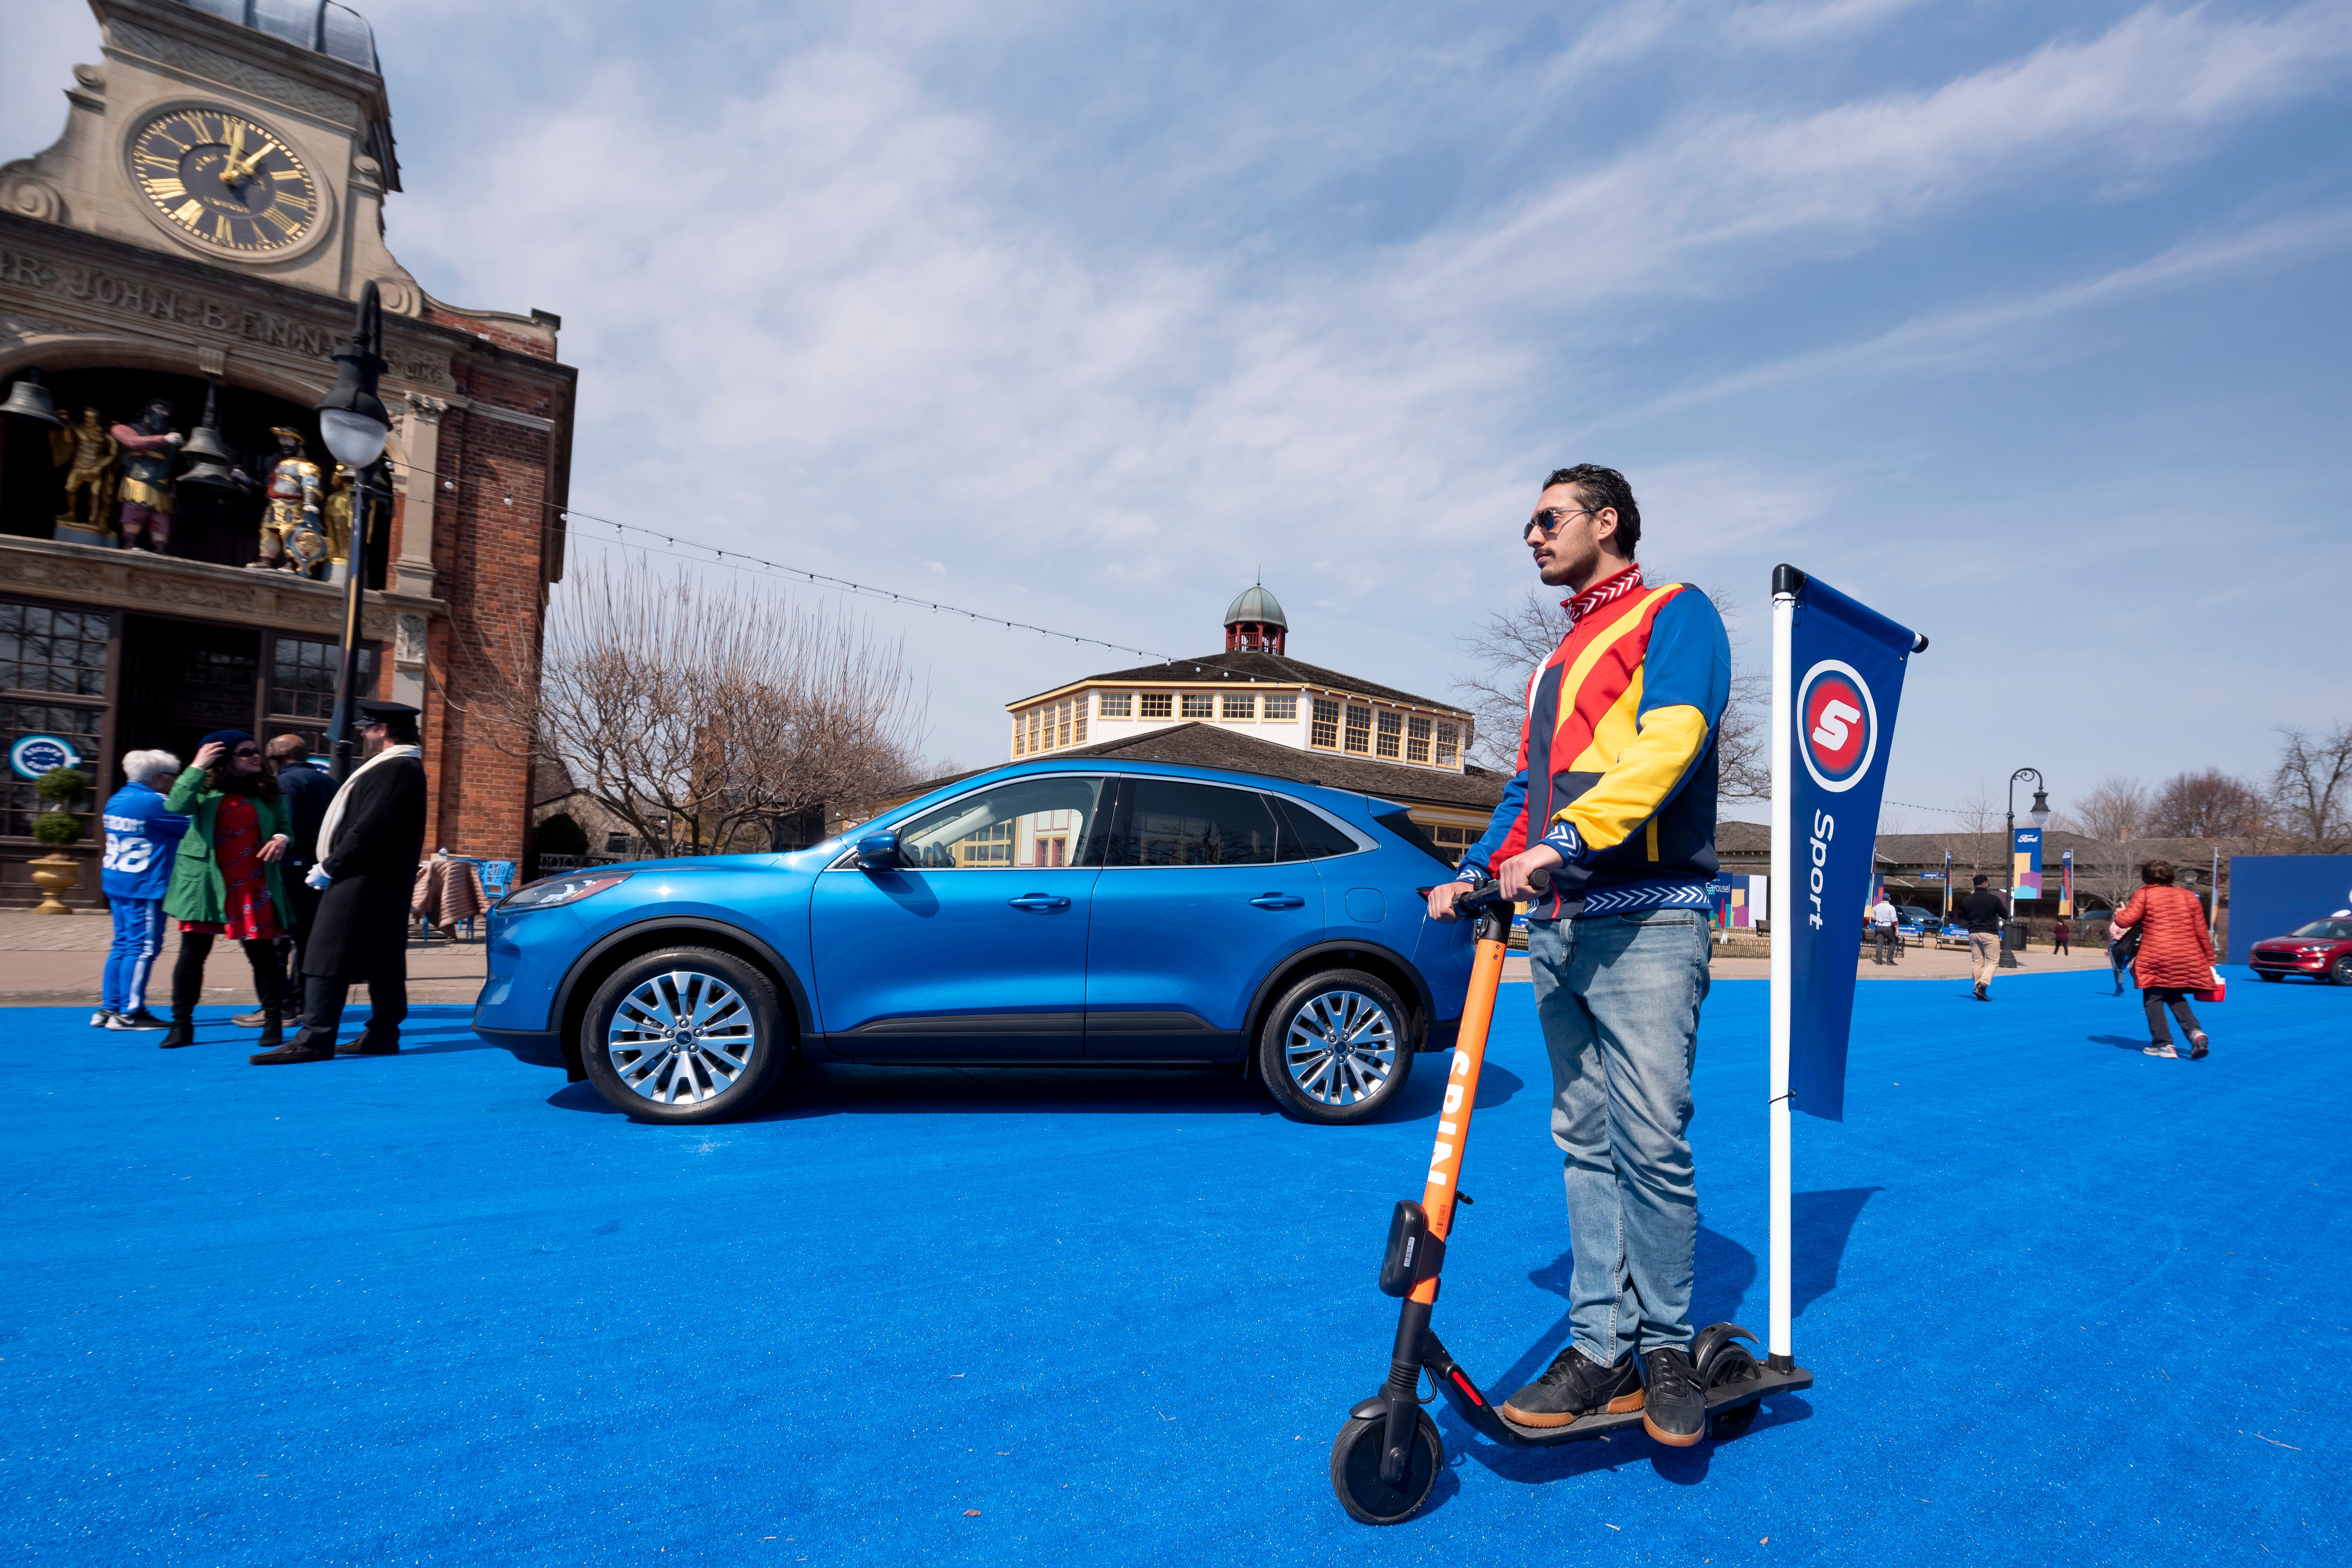 Performers, artists and journalists roam Greenfield Village during a reveal of the 2020 Ford Escape, in Dearborn.